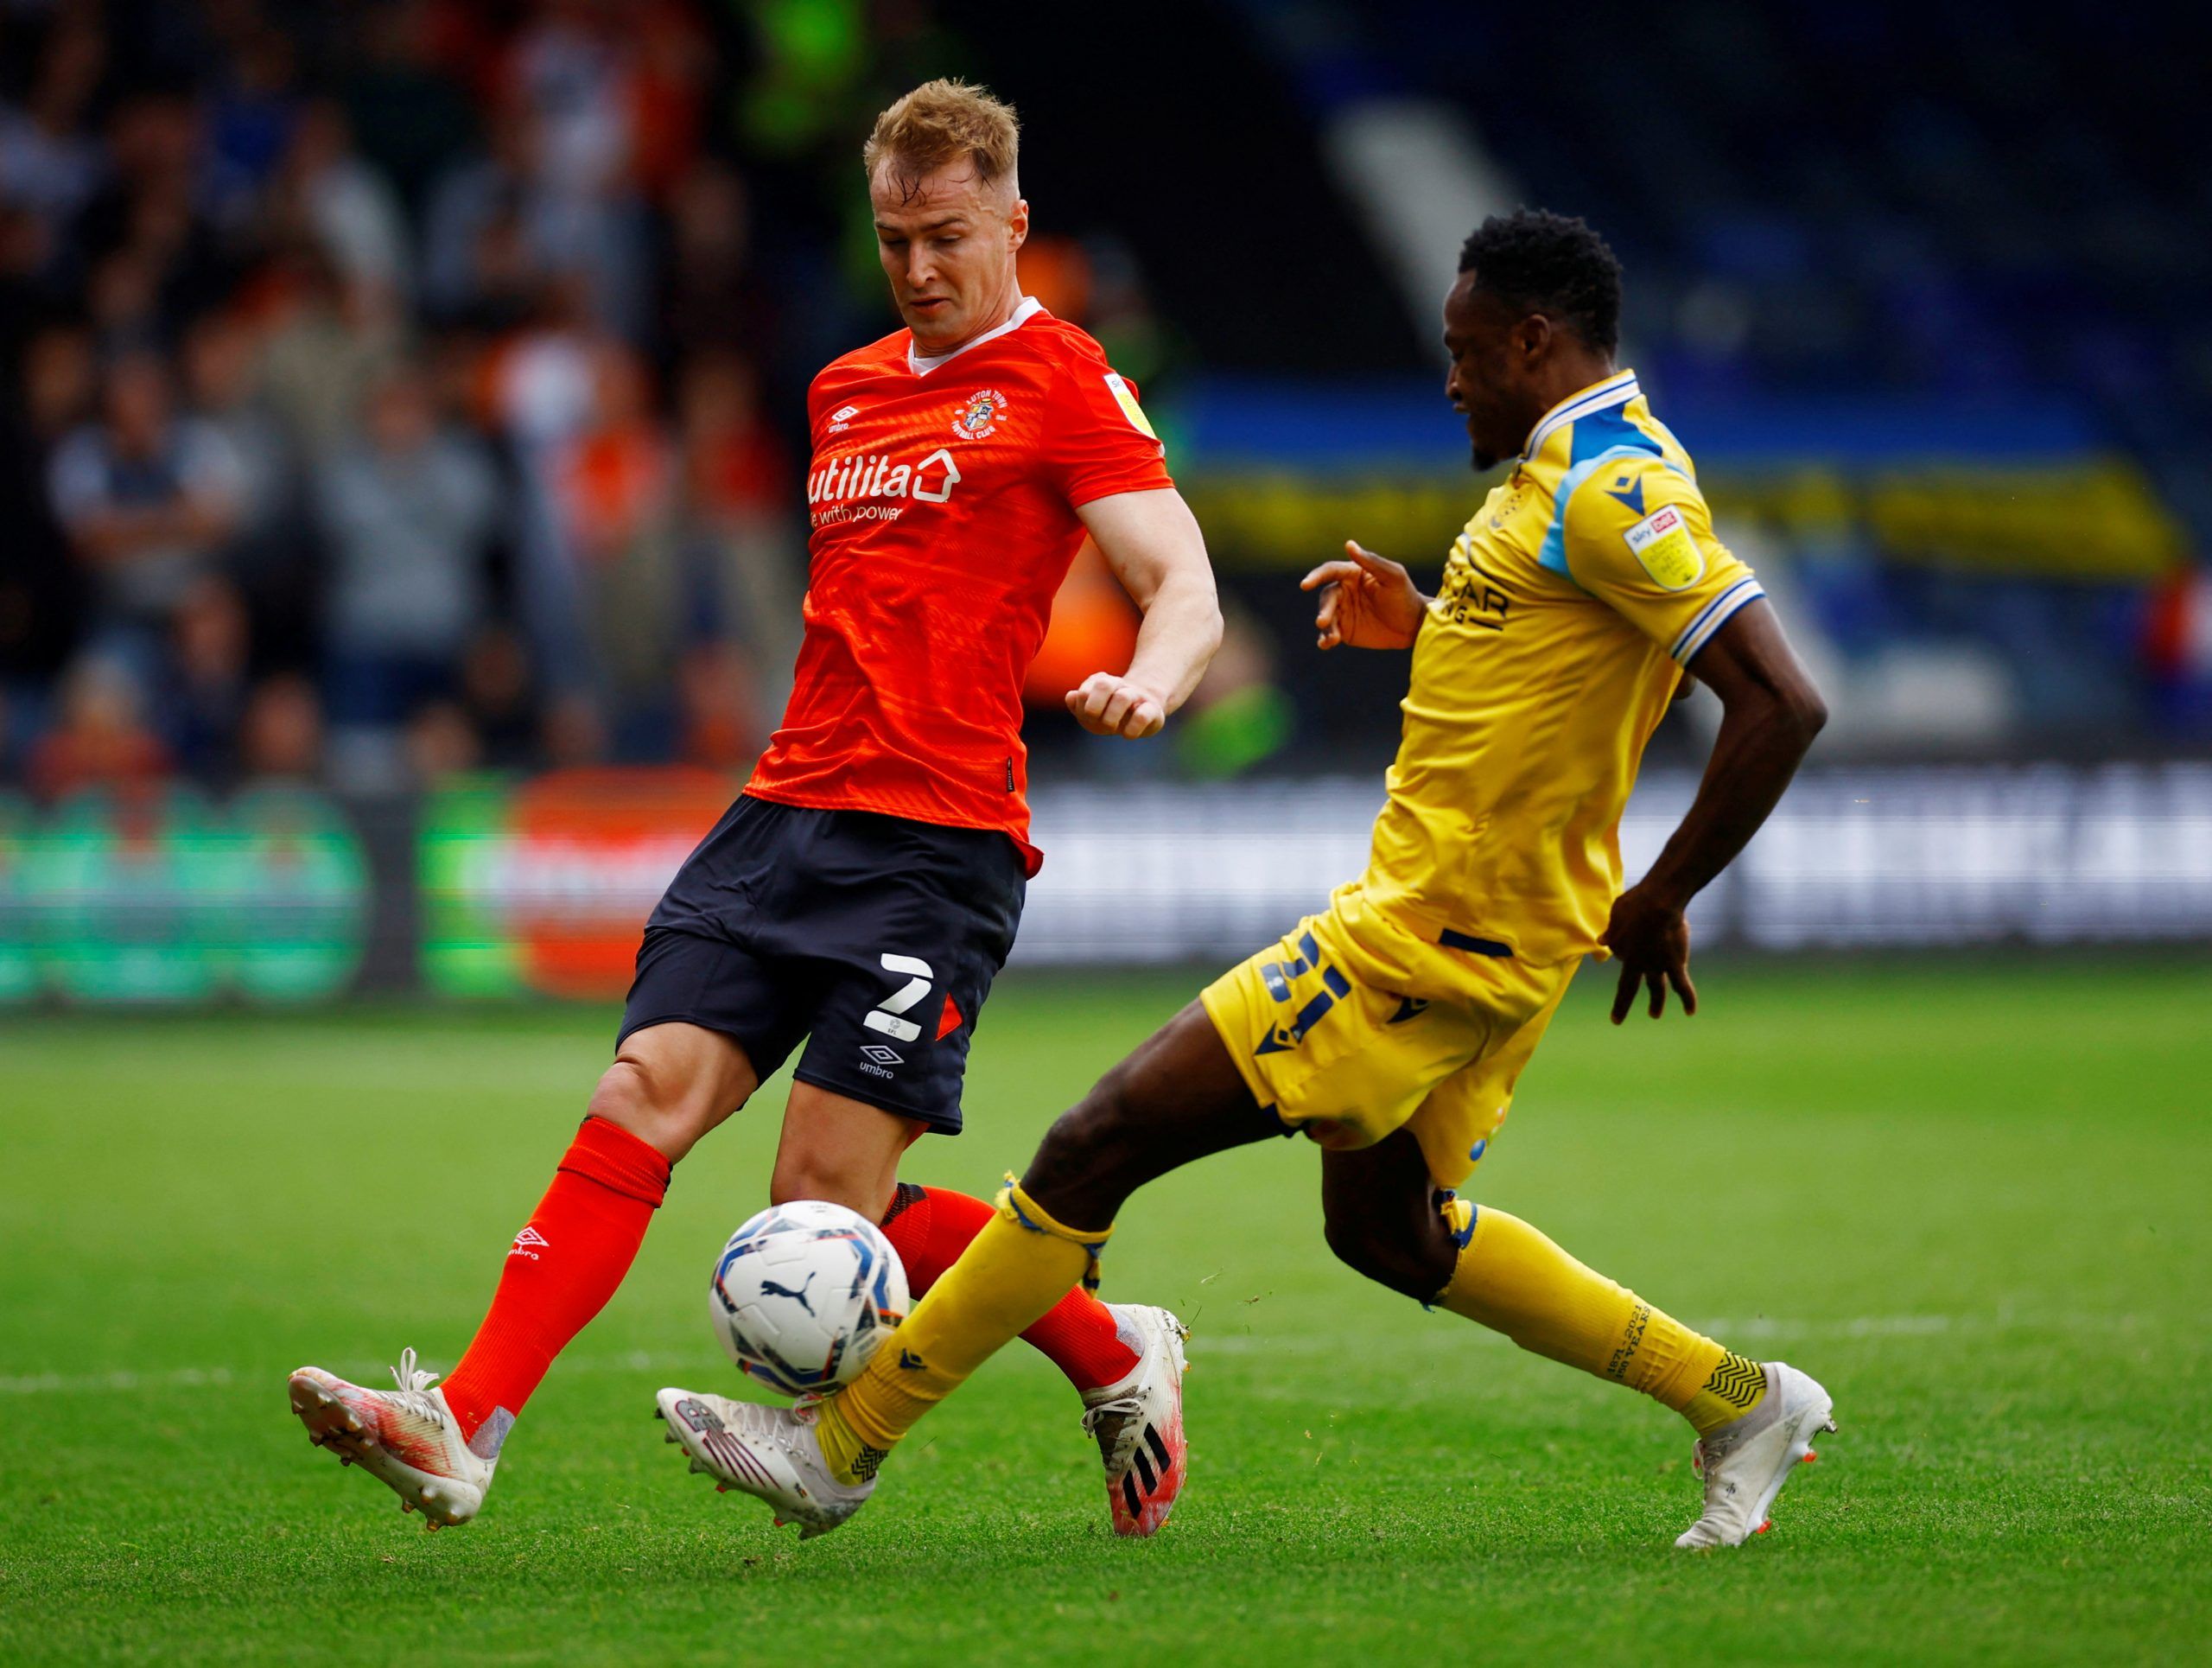 Soccer Football - Championship - Luton Town v Reading - Kenilworth Road, Luton, Britain - May 7, 2022 Luton Town's James Bree in action with Reading's Baba Rahman  Action Images/Andrew Boyers  EDITORIAL USE ONLY. No use with unauthorized audio, video, data, fixture lists, club/league logos or 